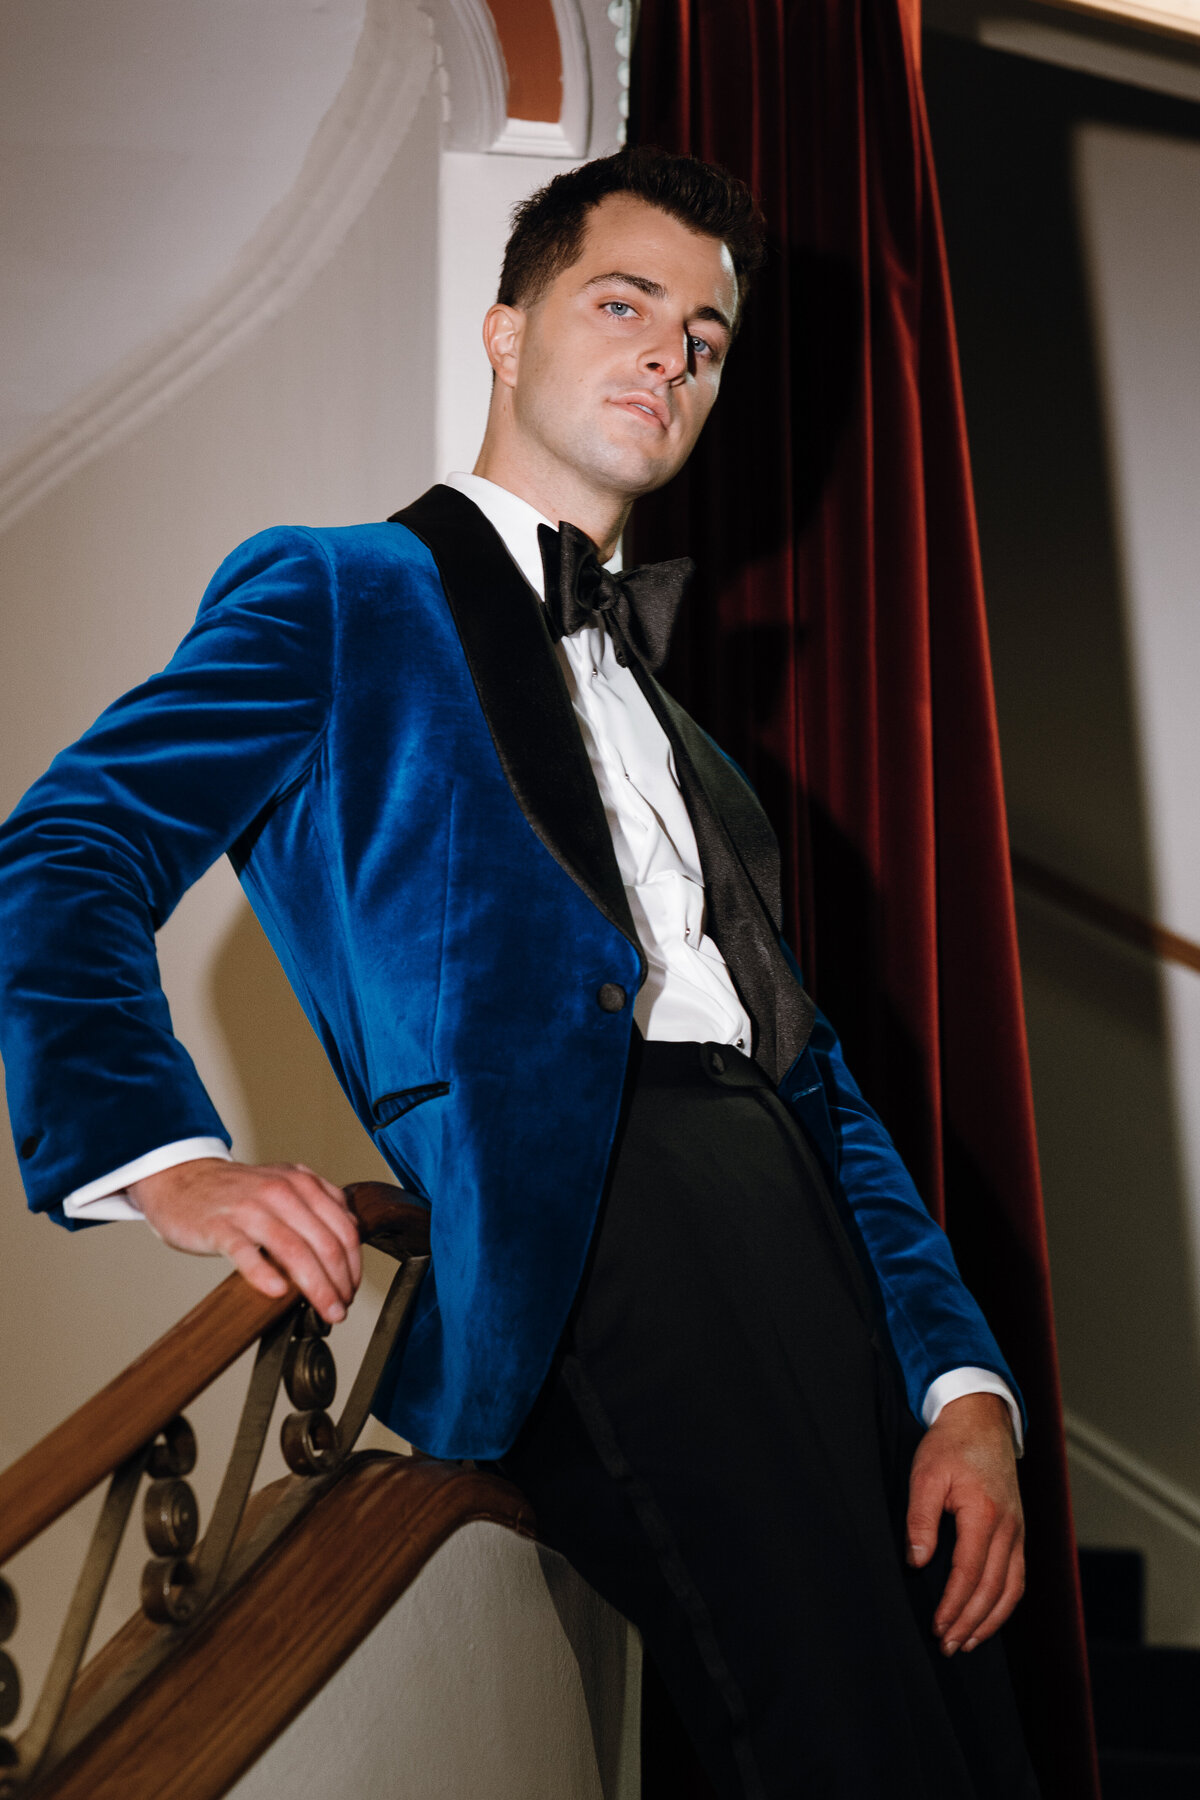 Close up image of a groom posing against the hand rail of a staircase.